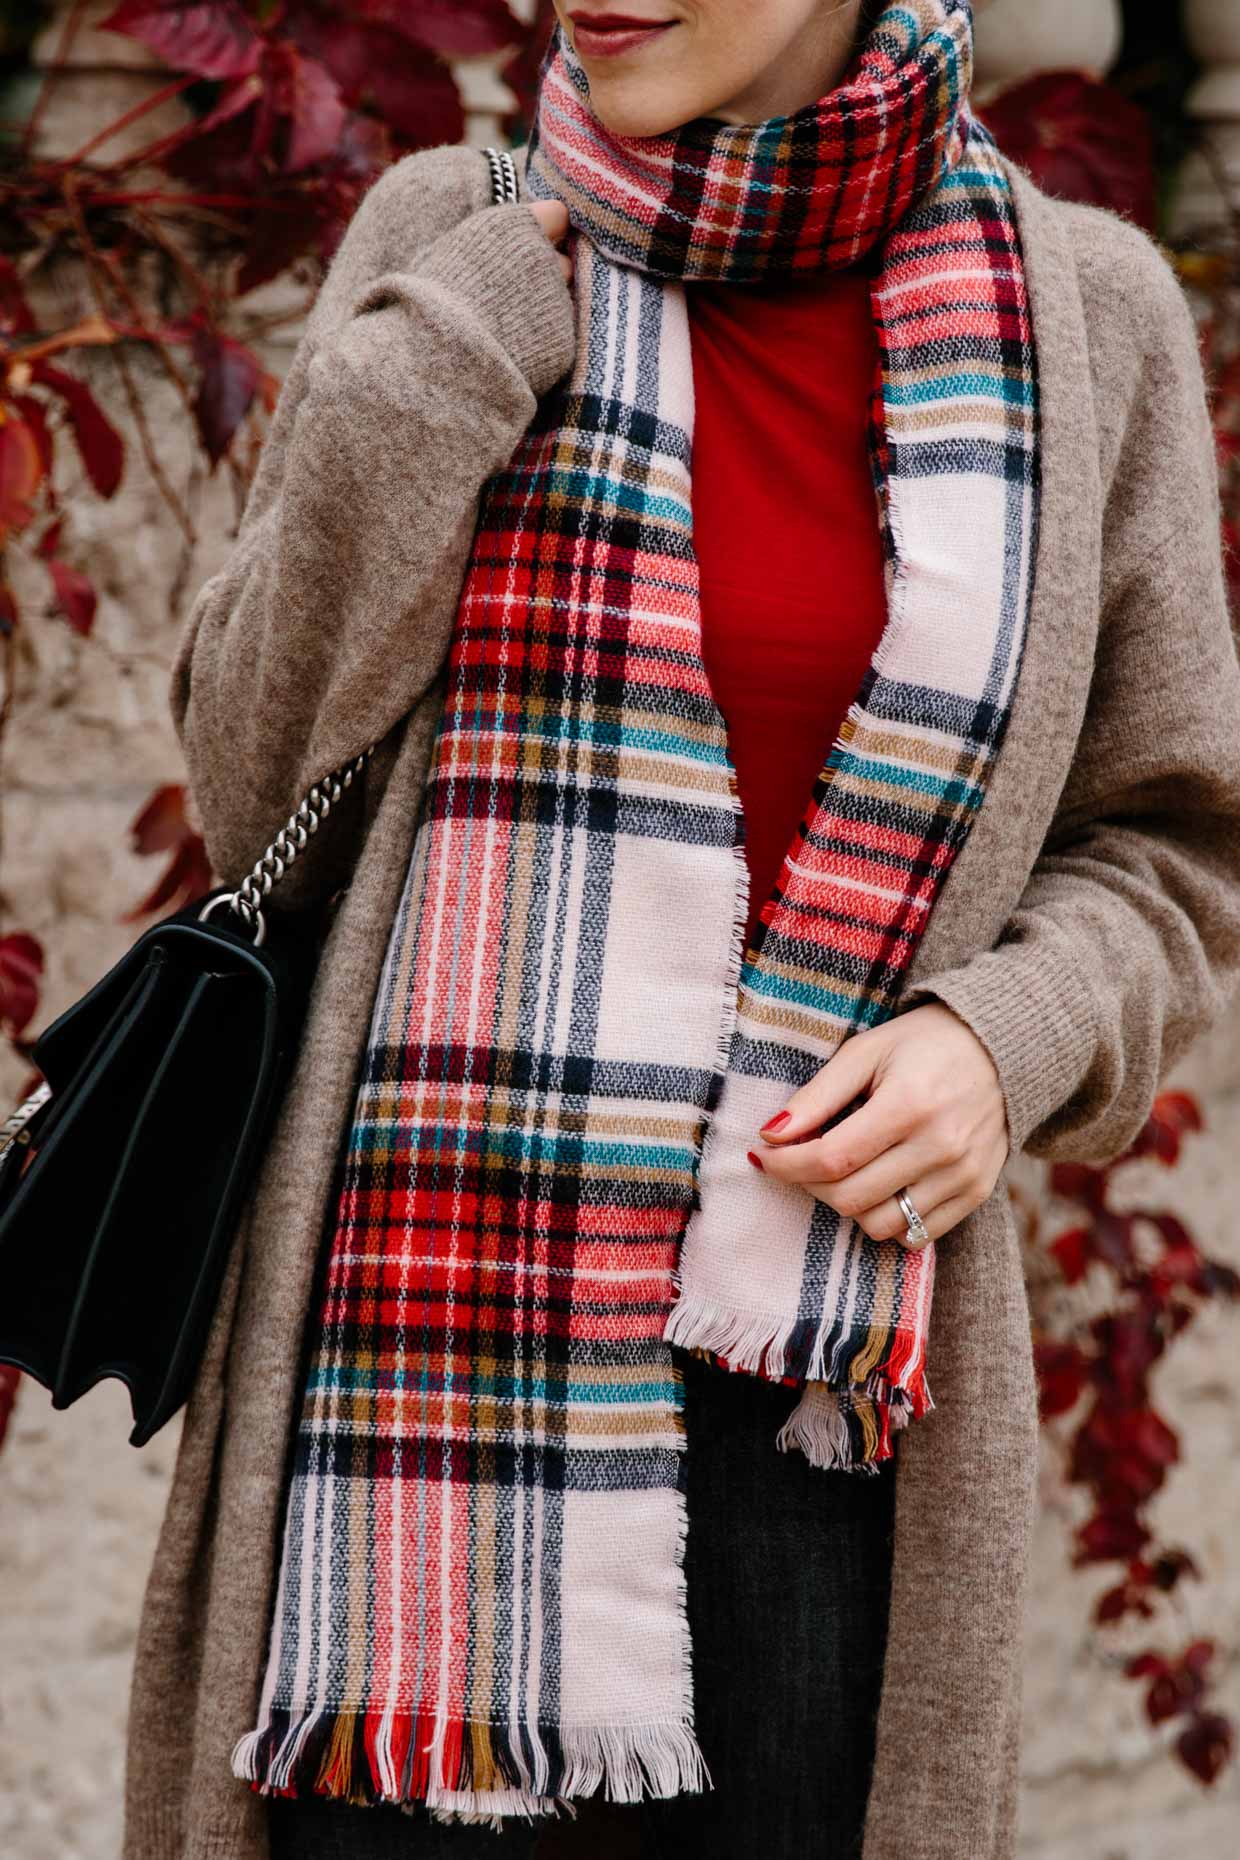 https://meagansmoda.com/wp-content/uploads/2018/12/Meagan-Brandon-fashion-blogger-of-Meagans-Moda-shows-how-to-wear-a-plaid-scarf-for-Christmas-and-look-stylish.jpg